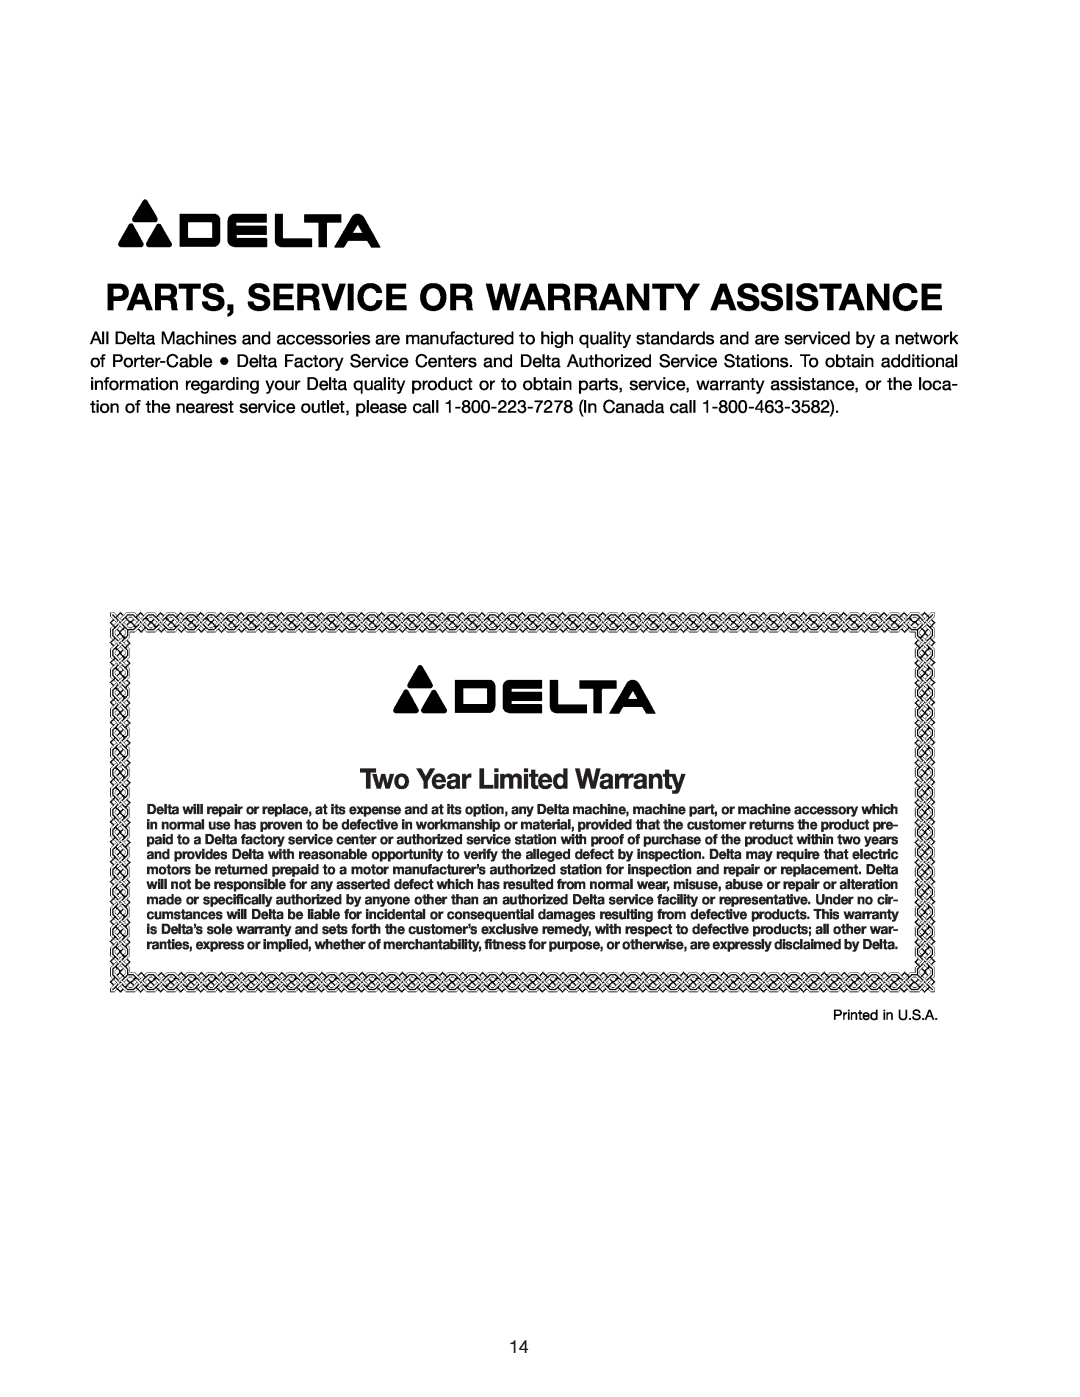 Delta 28-299A, 28-241 instruction manual Parts, Service Or Warranty Assistance, Two Year Limited Warranty 